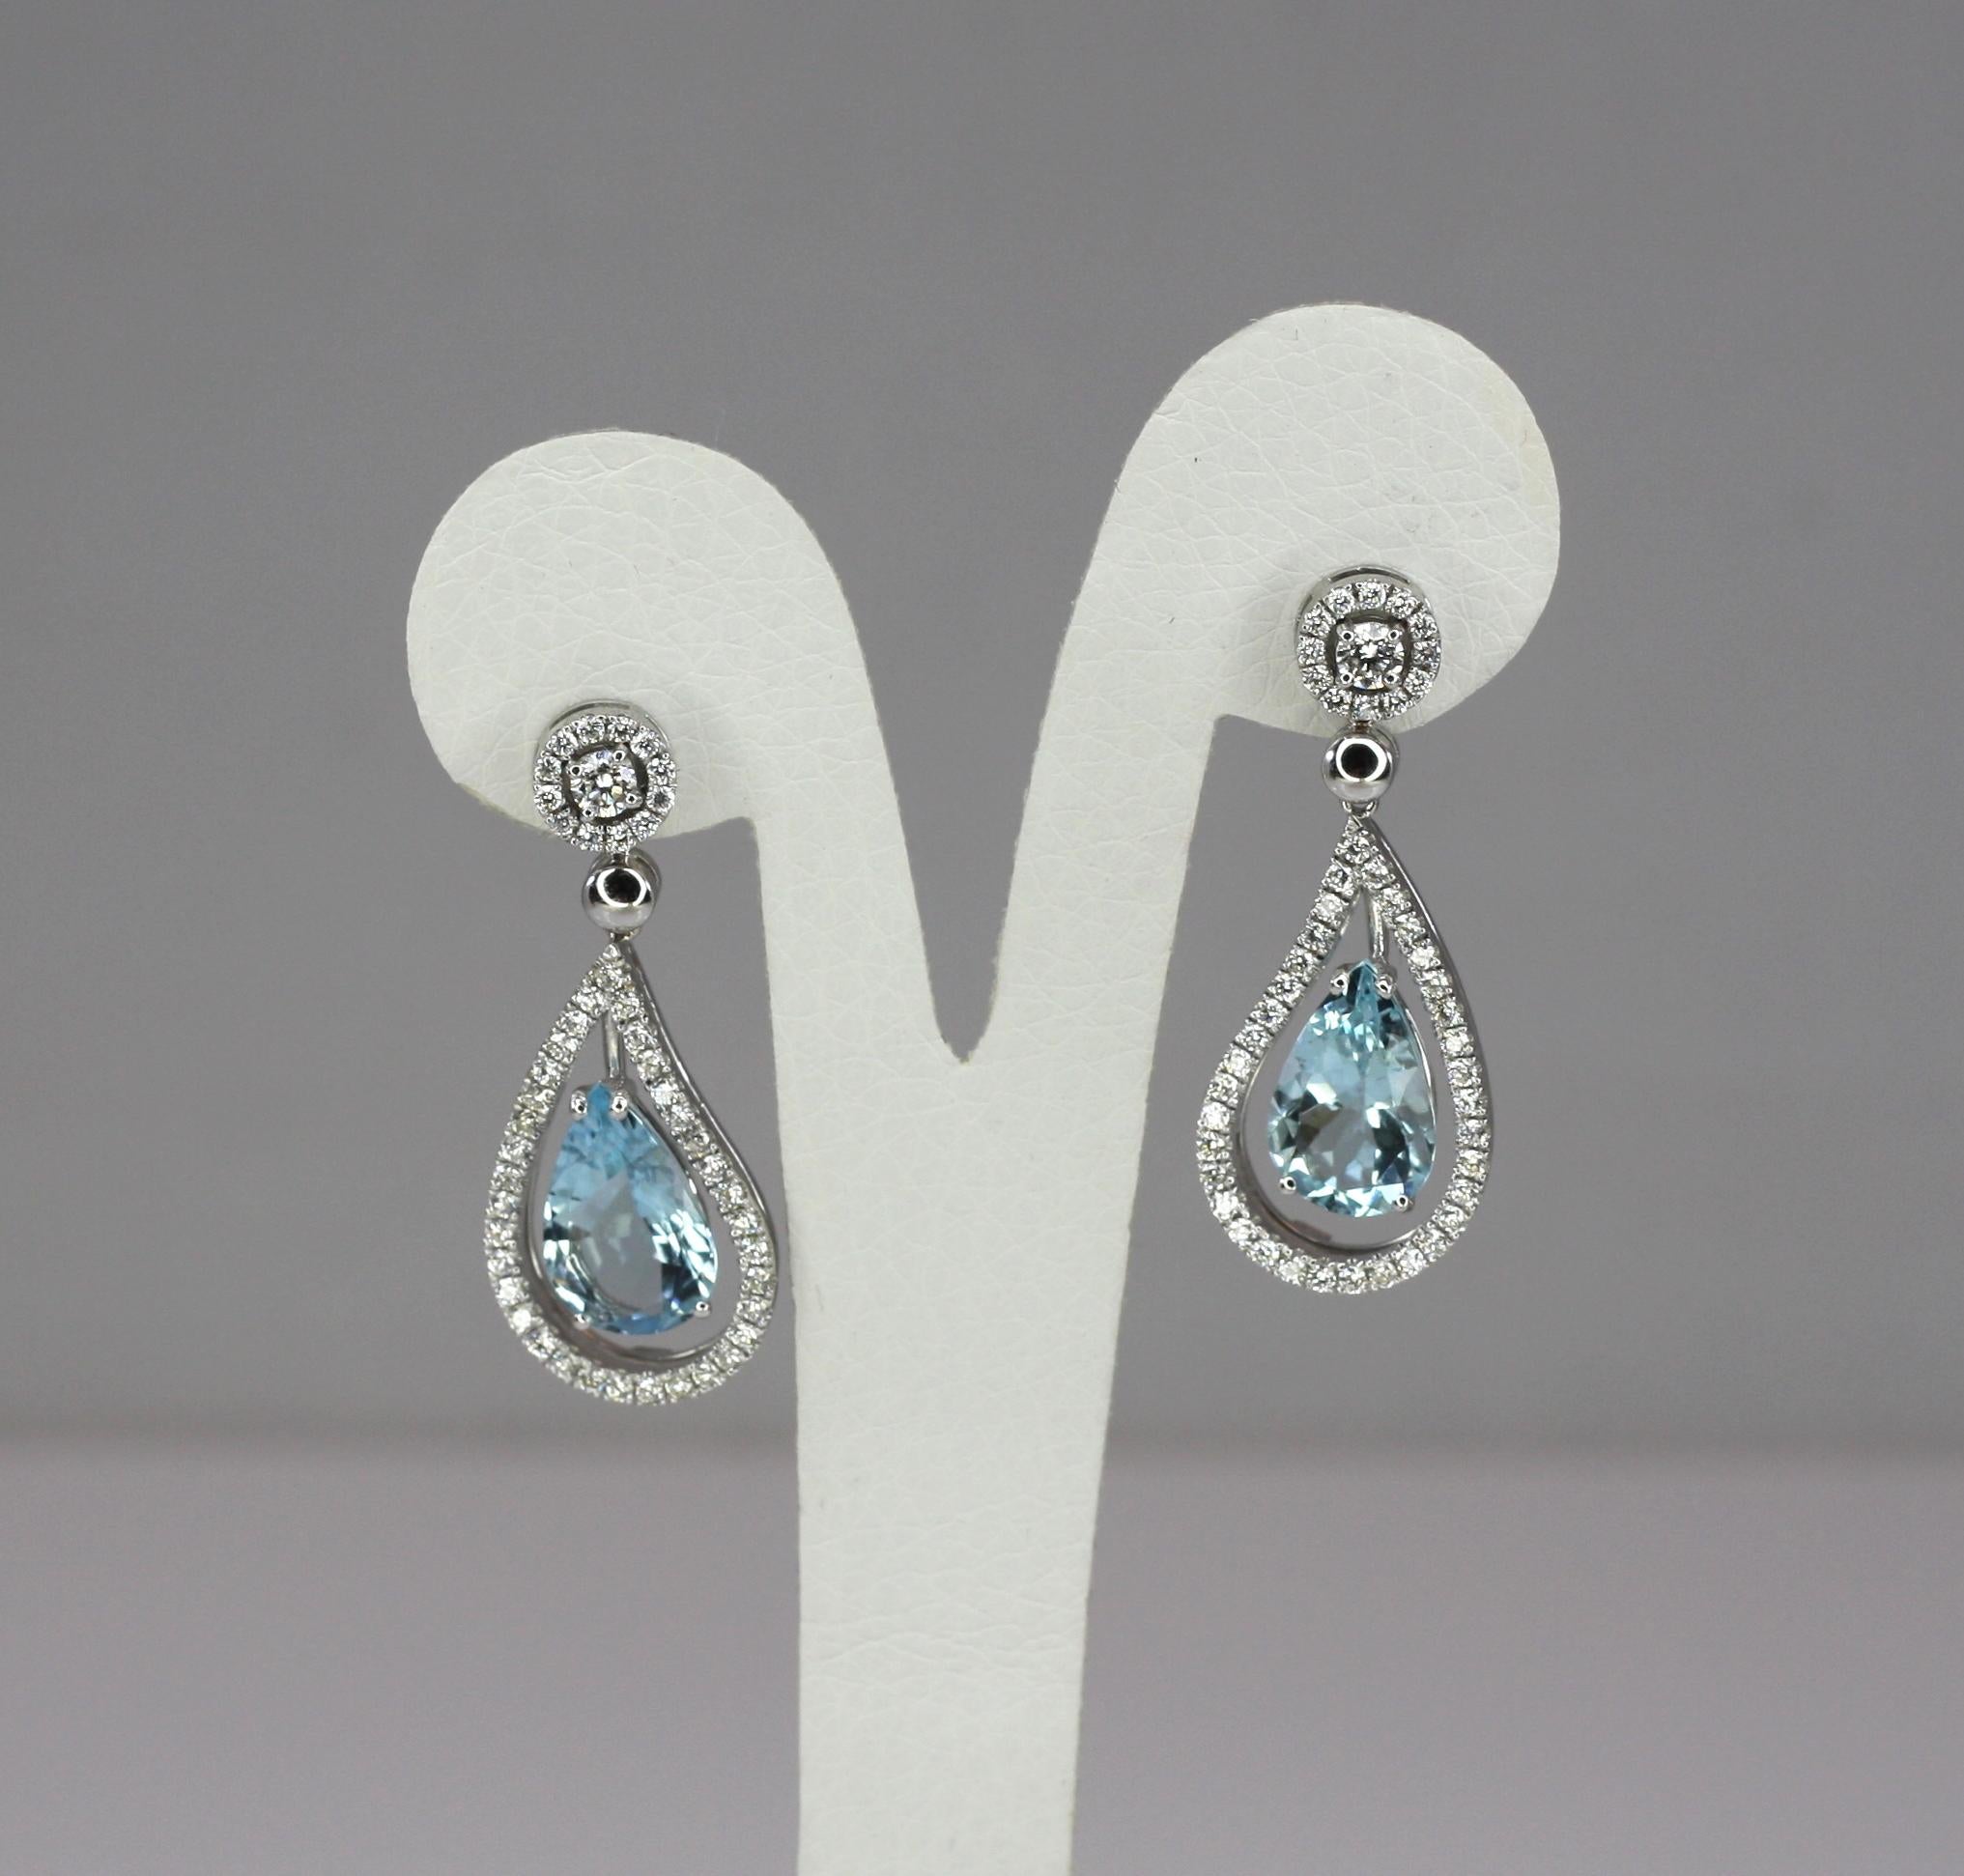 S.Georgios designer Earrings in 18 Karat white gold with two gorgeous natural Pear Shape Aquamarines and pure white brilliant cut Diamonds. These beautiful dangle earrings have brilliant-cut Diamonds total weight of 1.46 Carats and stunning natural